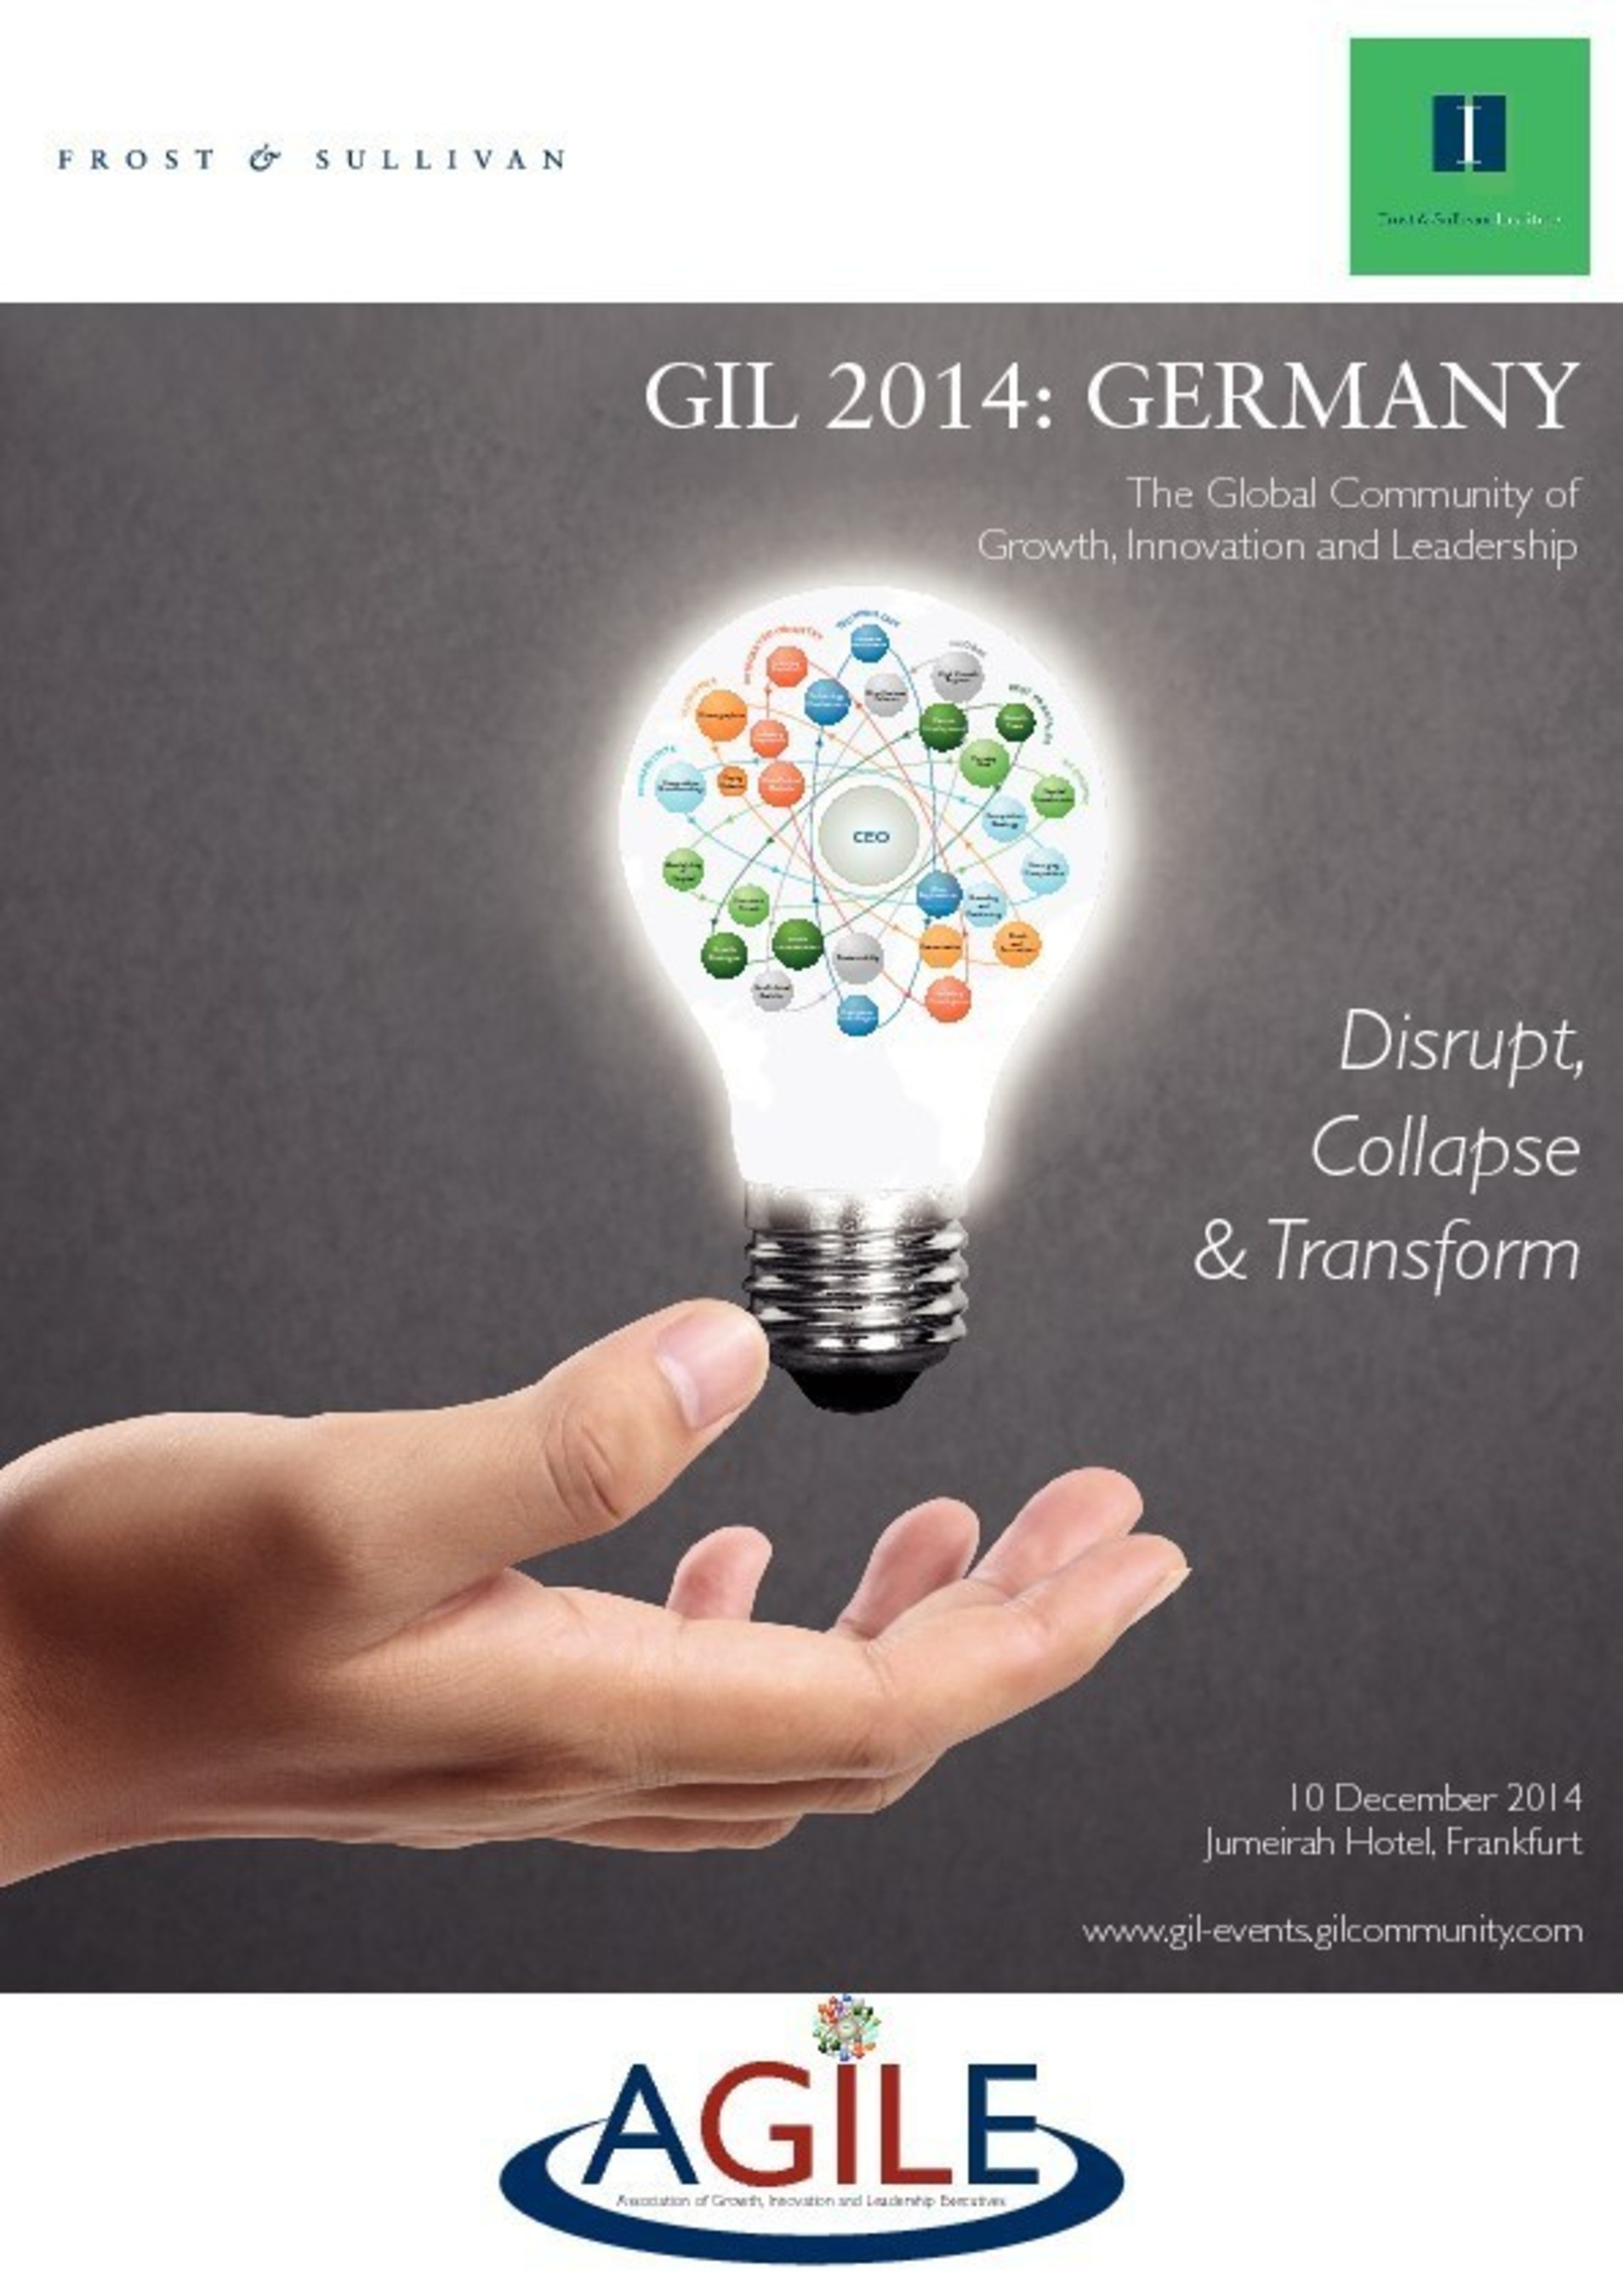 GIL 2014: Germany returns to the Jumeirah Hotel in Frankfurt am Main for the second consecutive year on 10th December 2014.